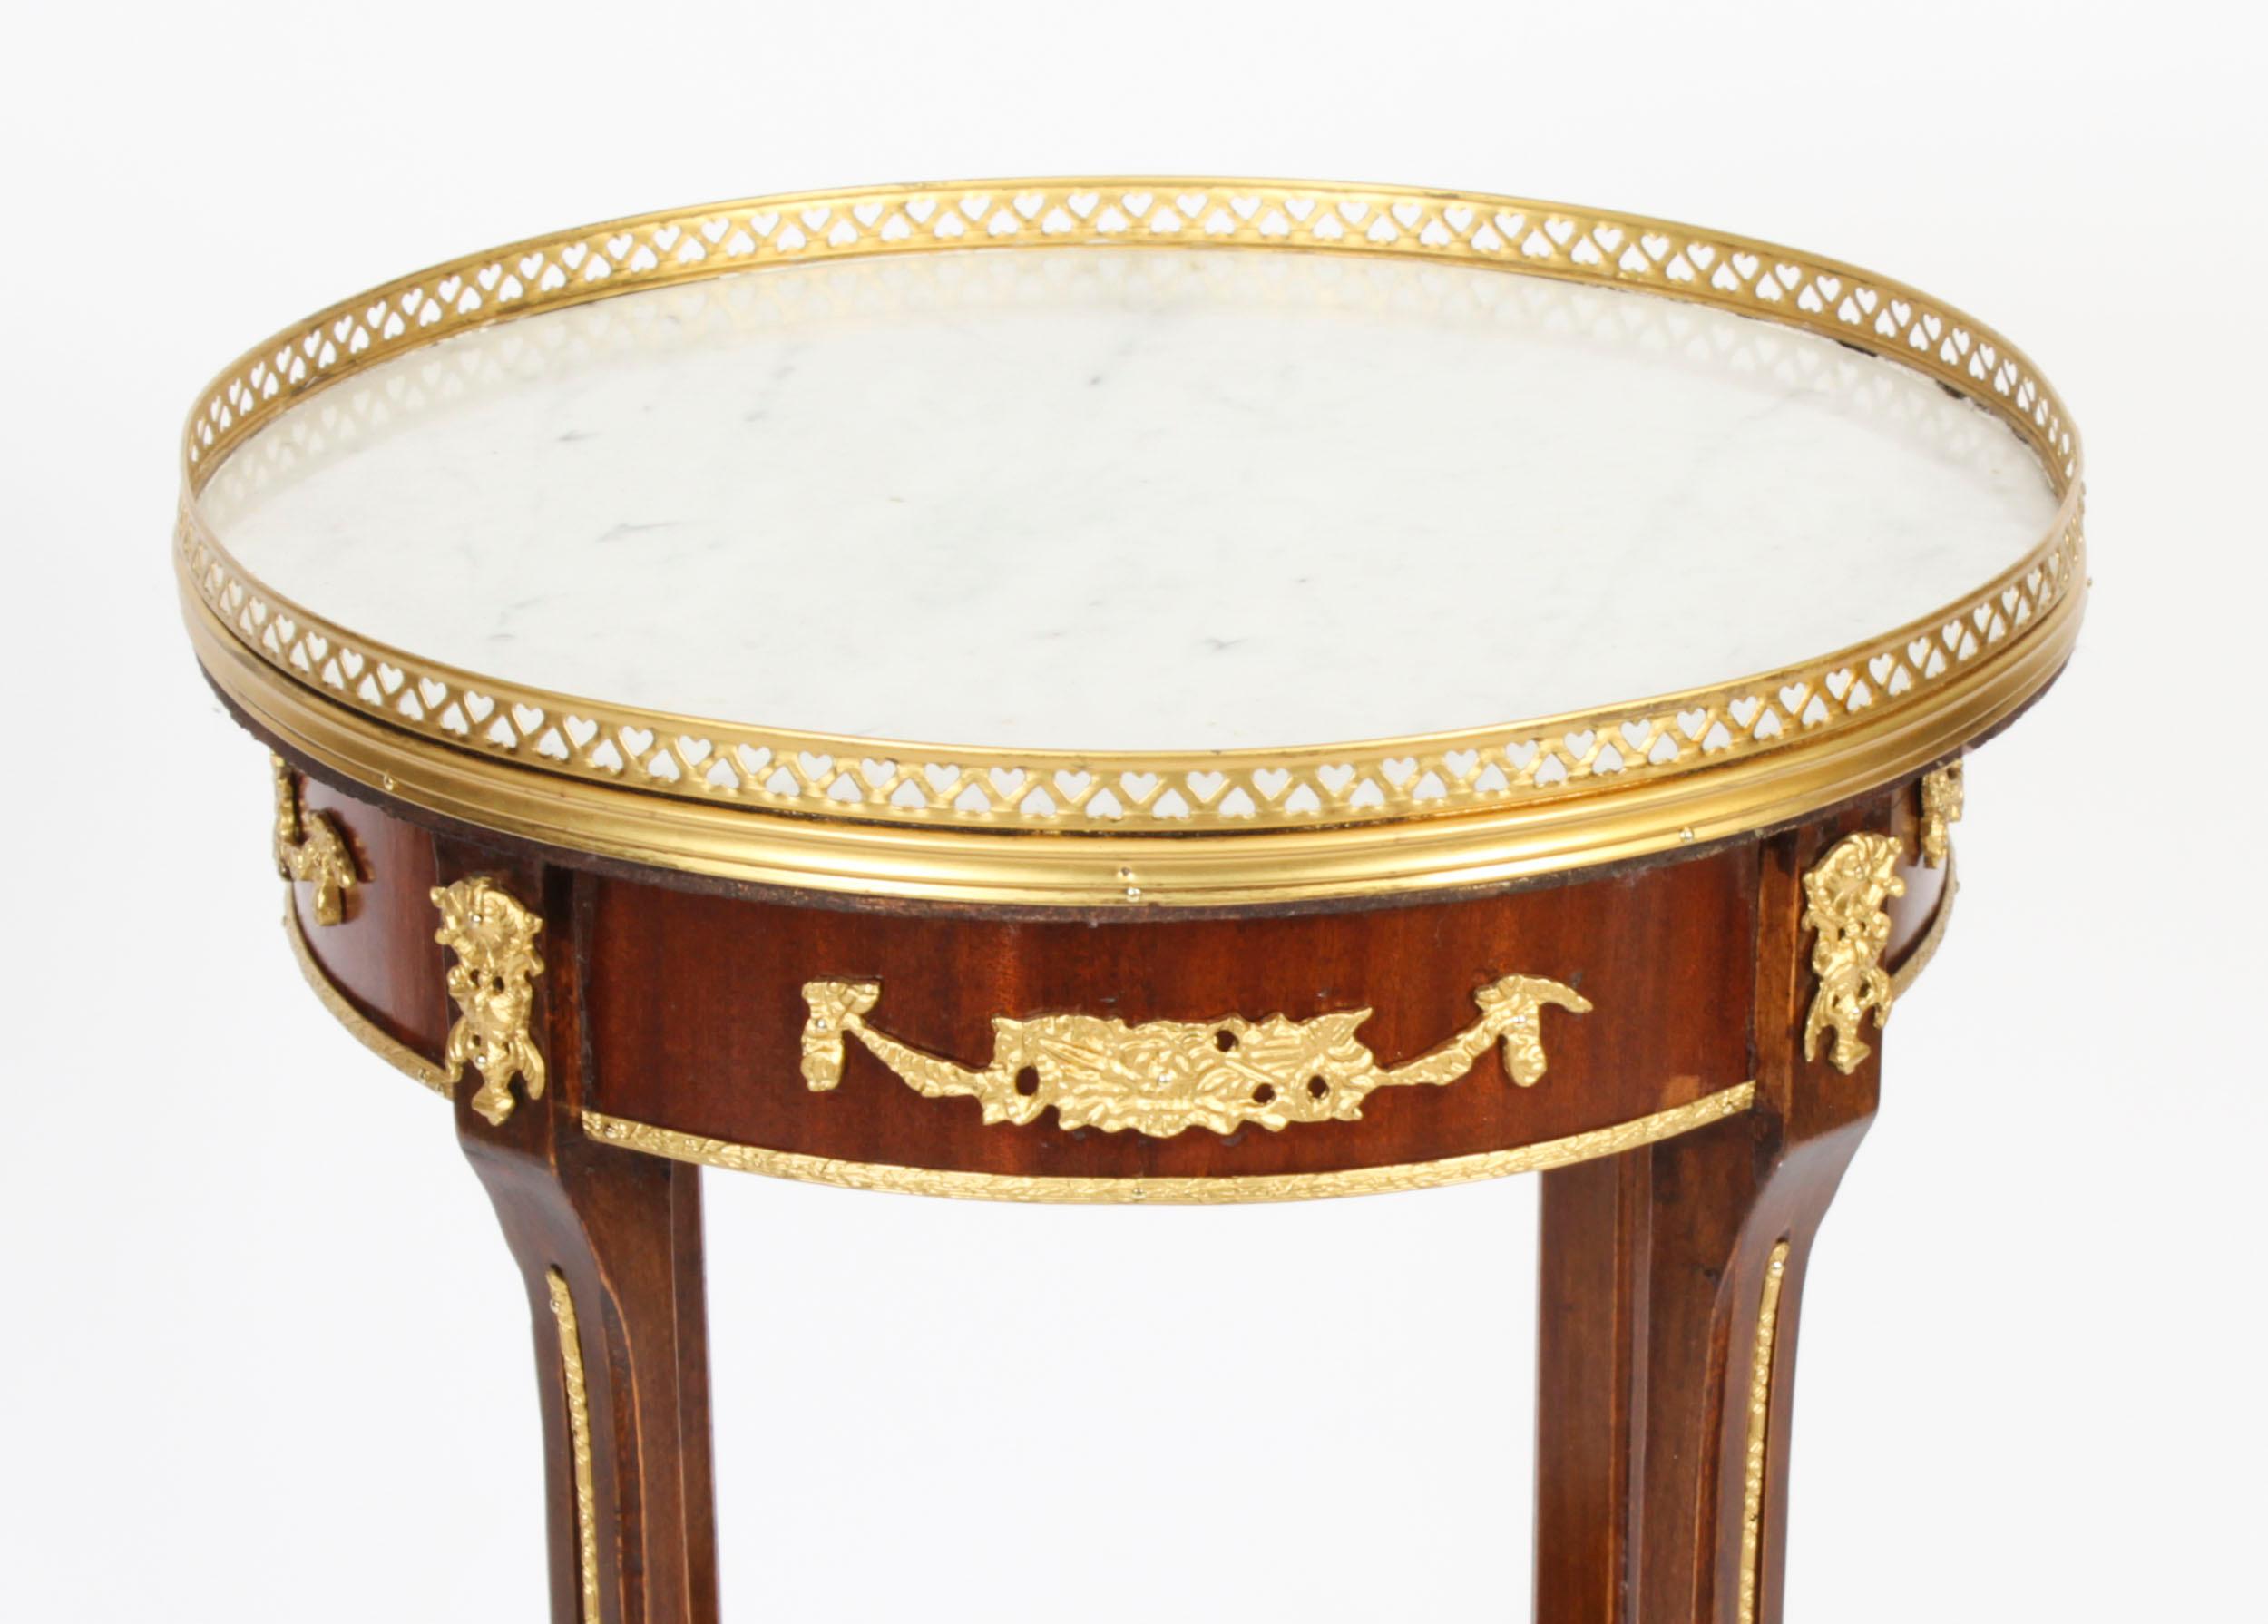 Antique French Empire Marble & Ormolu Occasional Table, 19th Century In Good Condition For Sale In London, GB